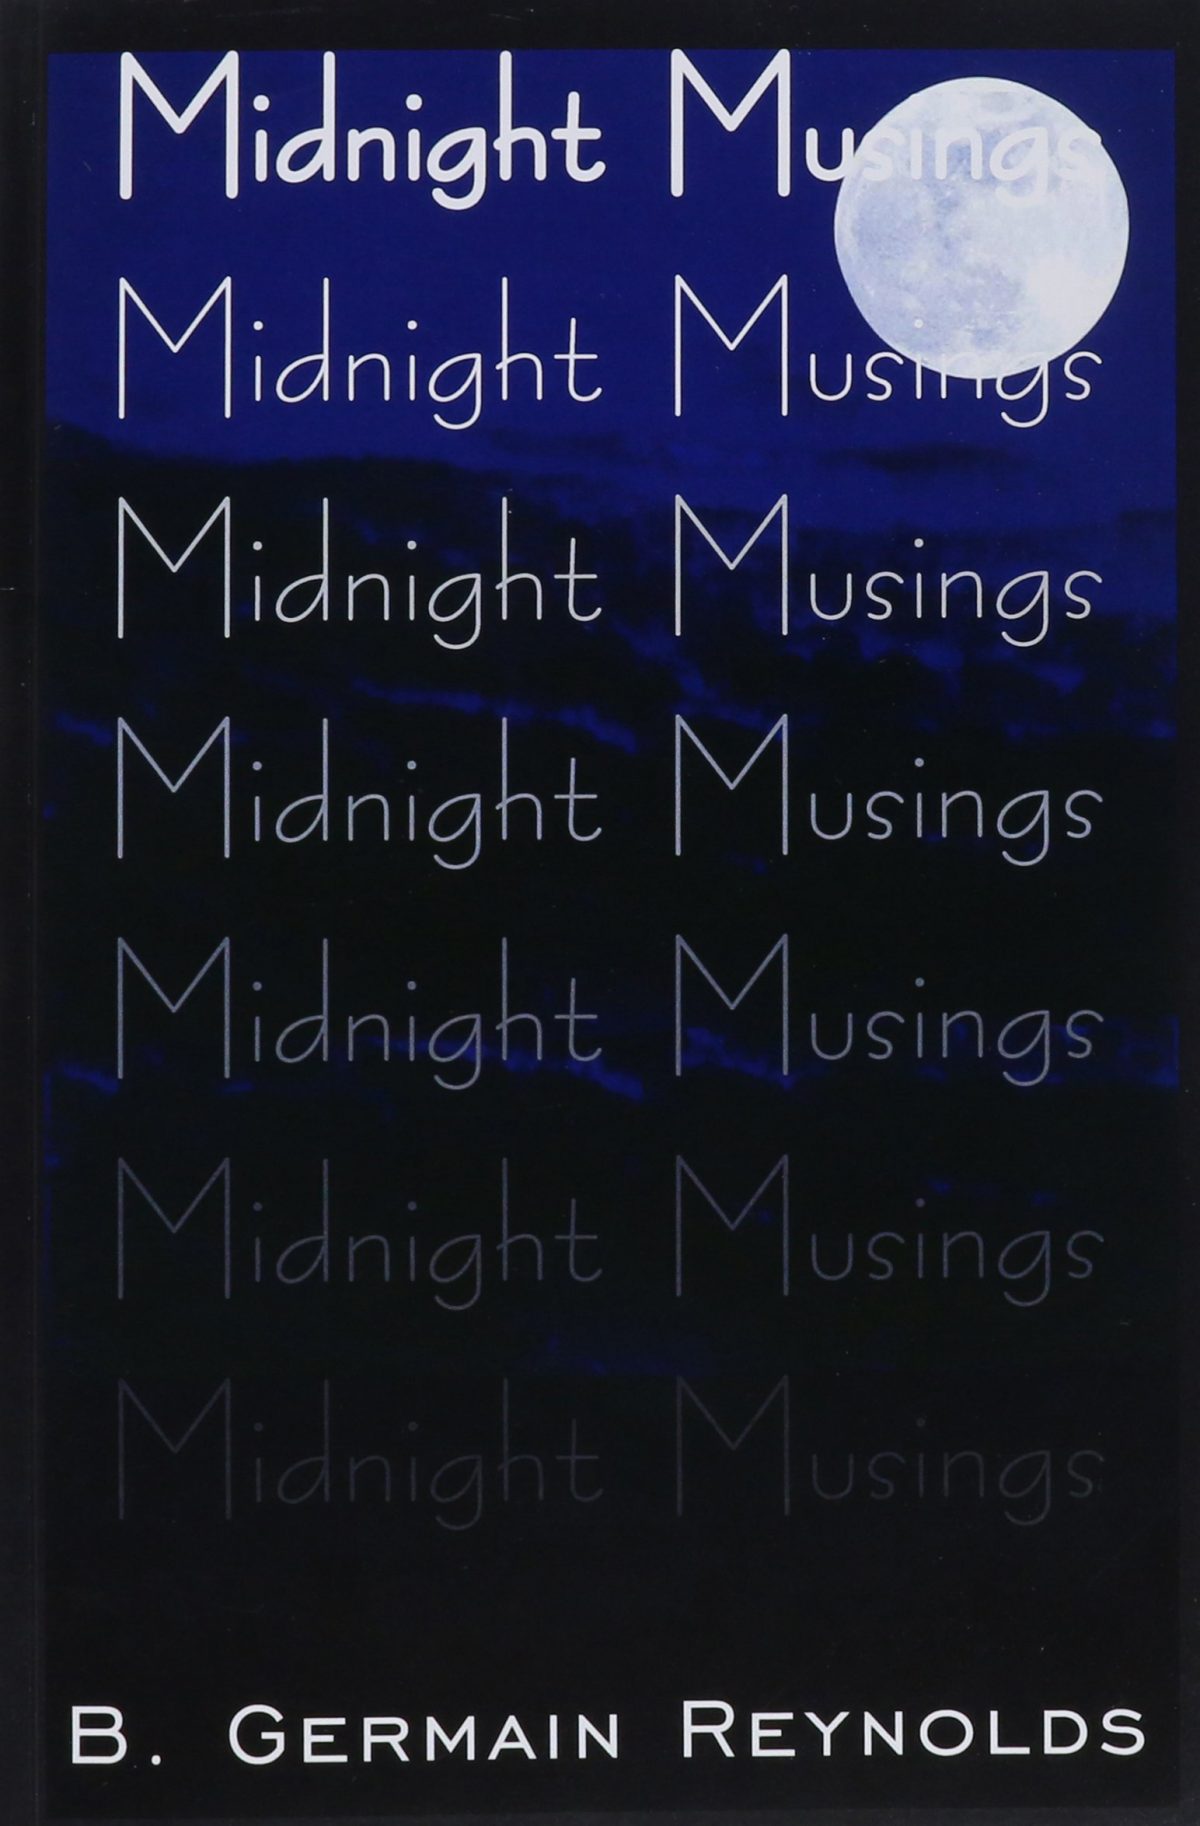 The cover of Midnight Musings